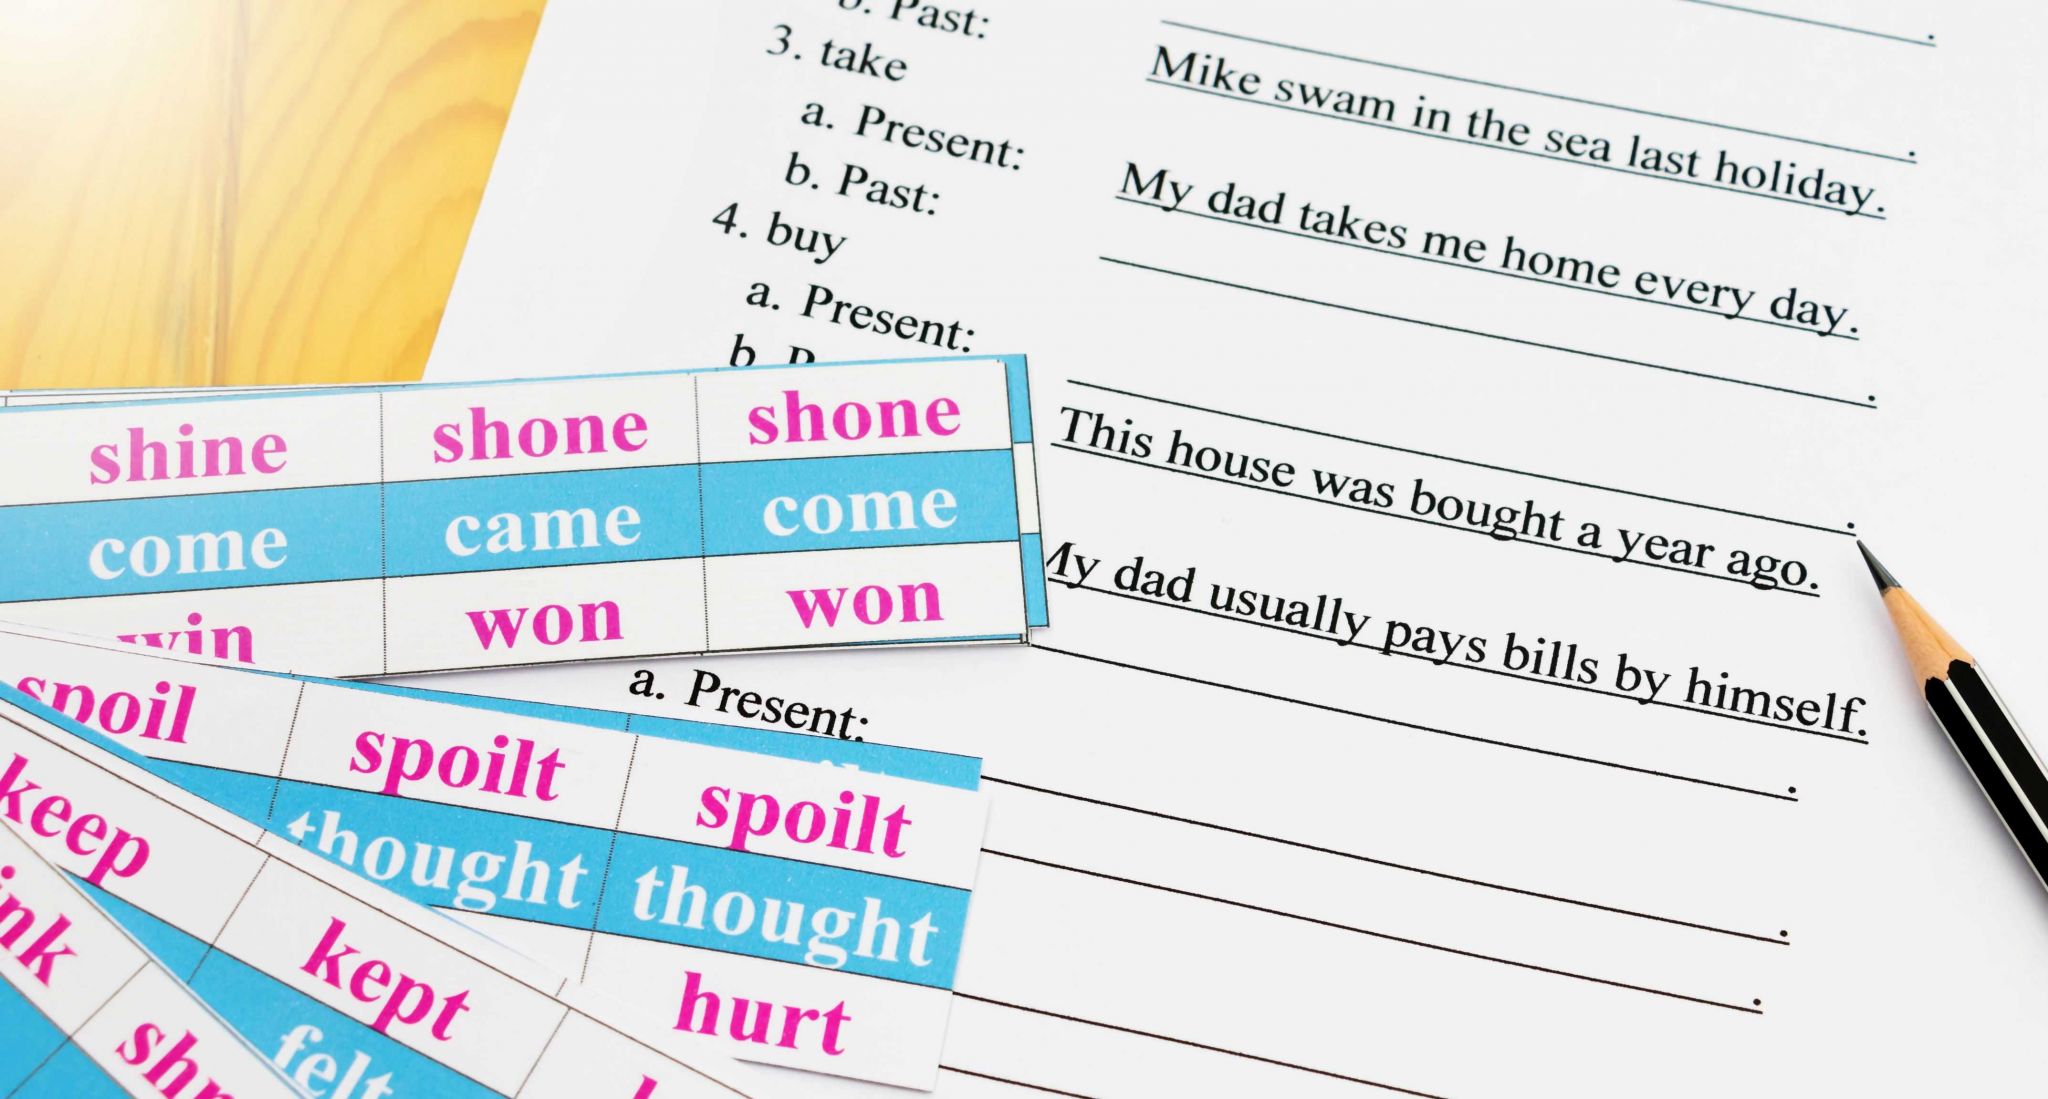 Adjectives Worksheet 3 Spanish Answers together with Past Participles In English Grammar